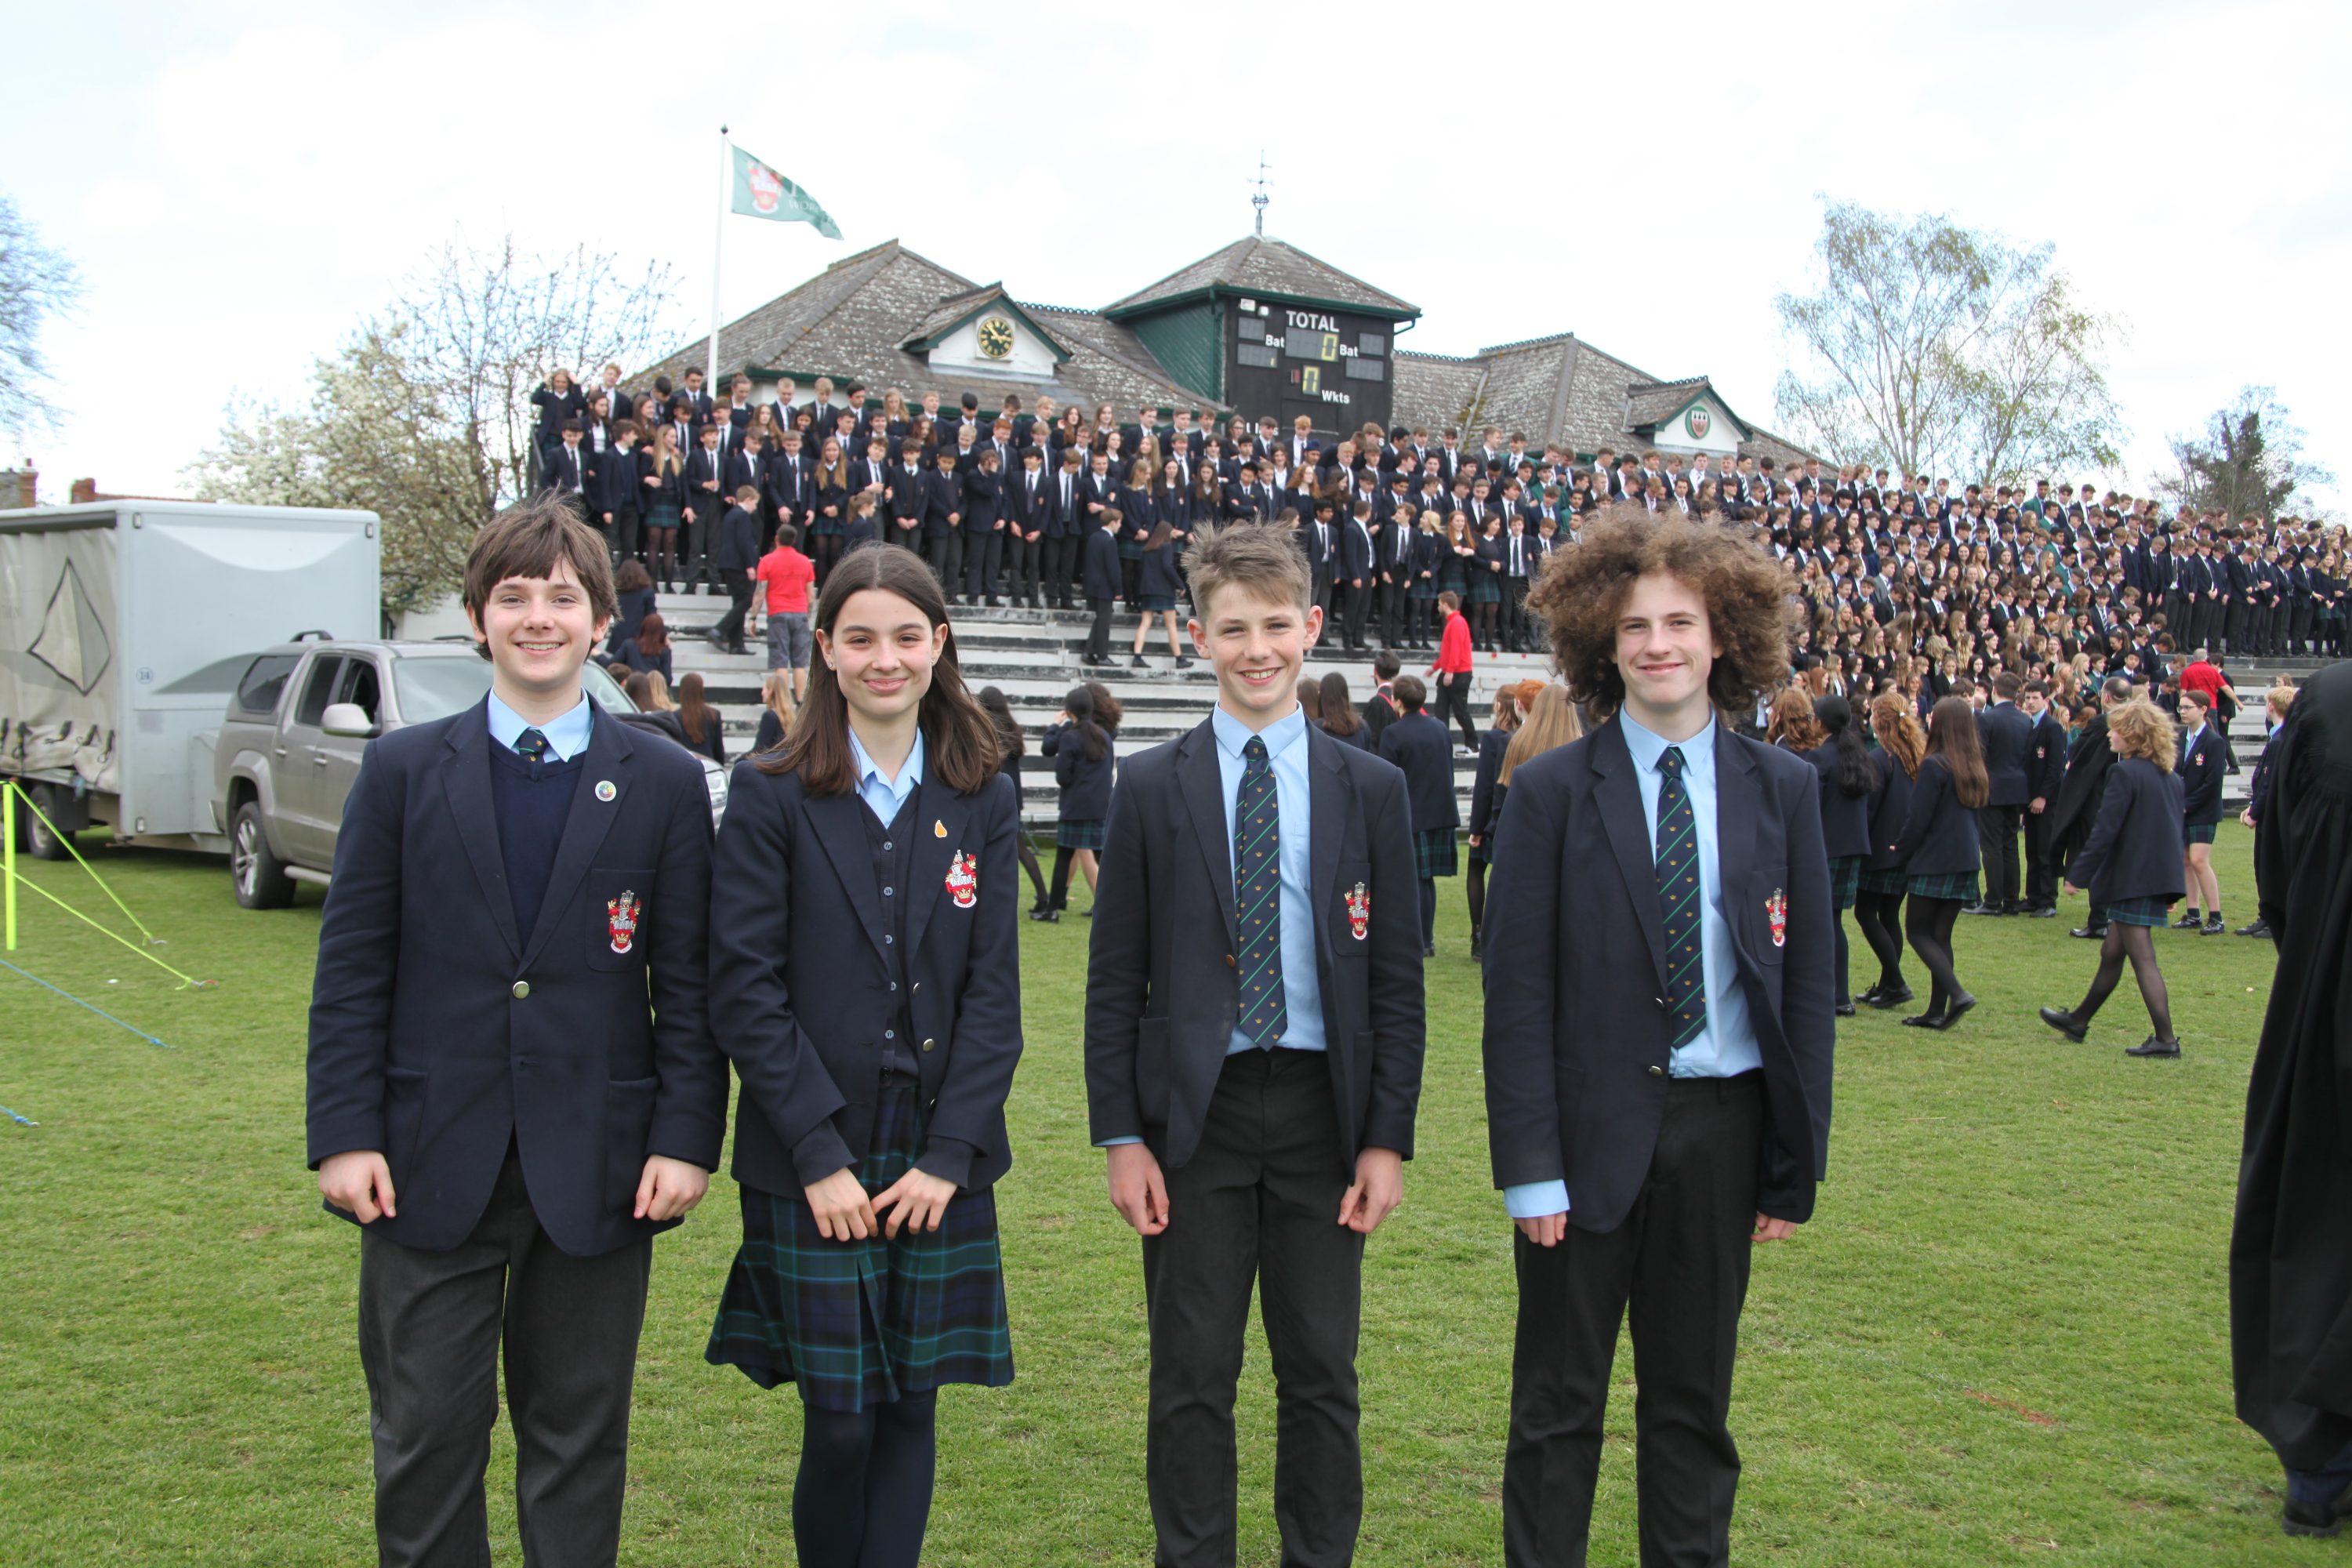 Smile please-Capturing a moment in time, Whole School Photograph